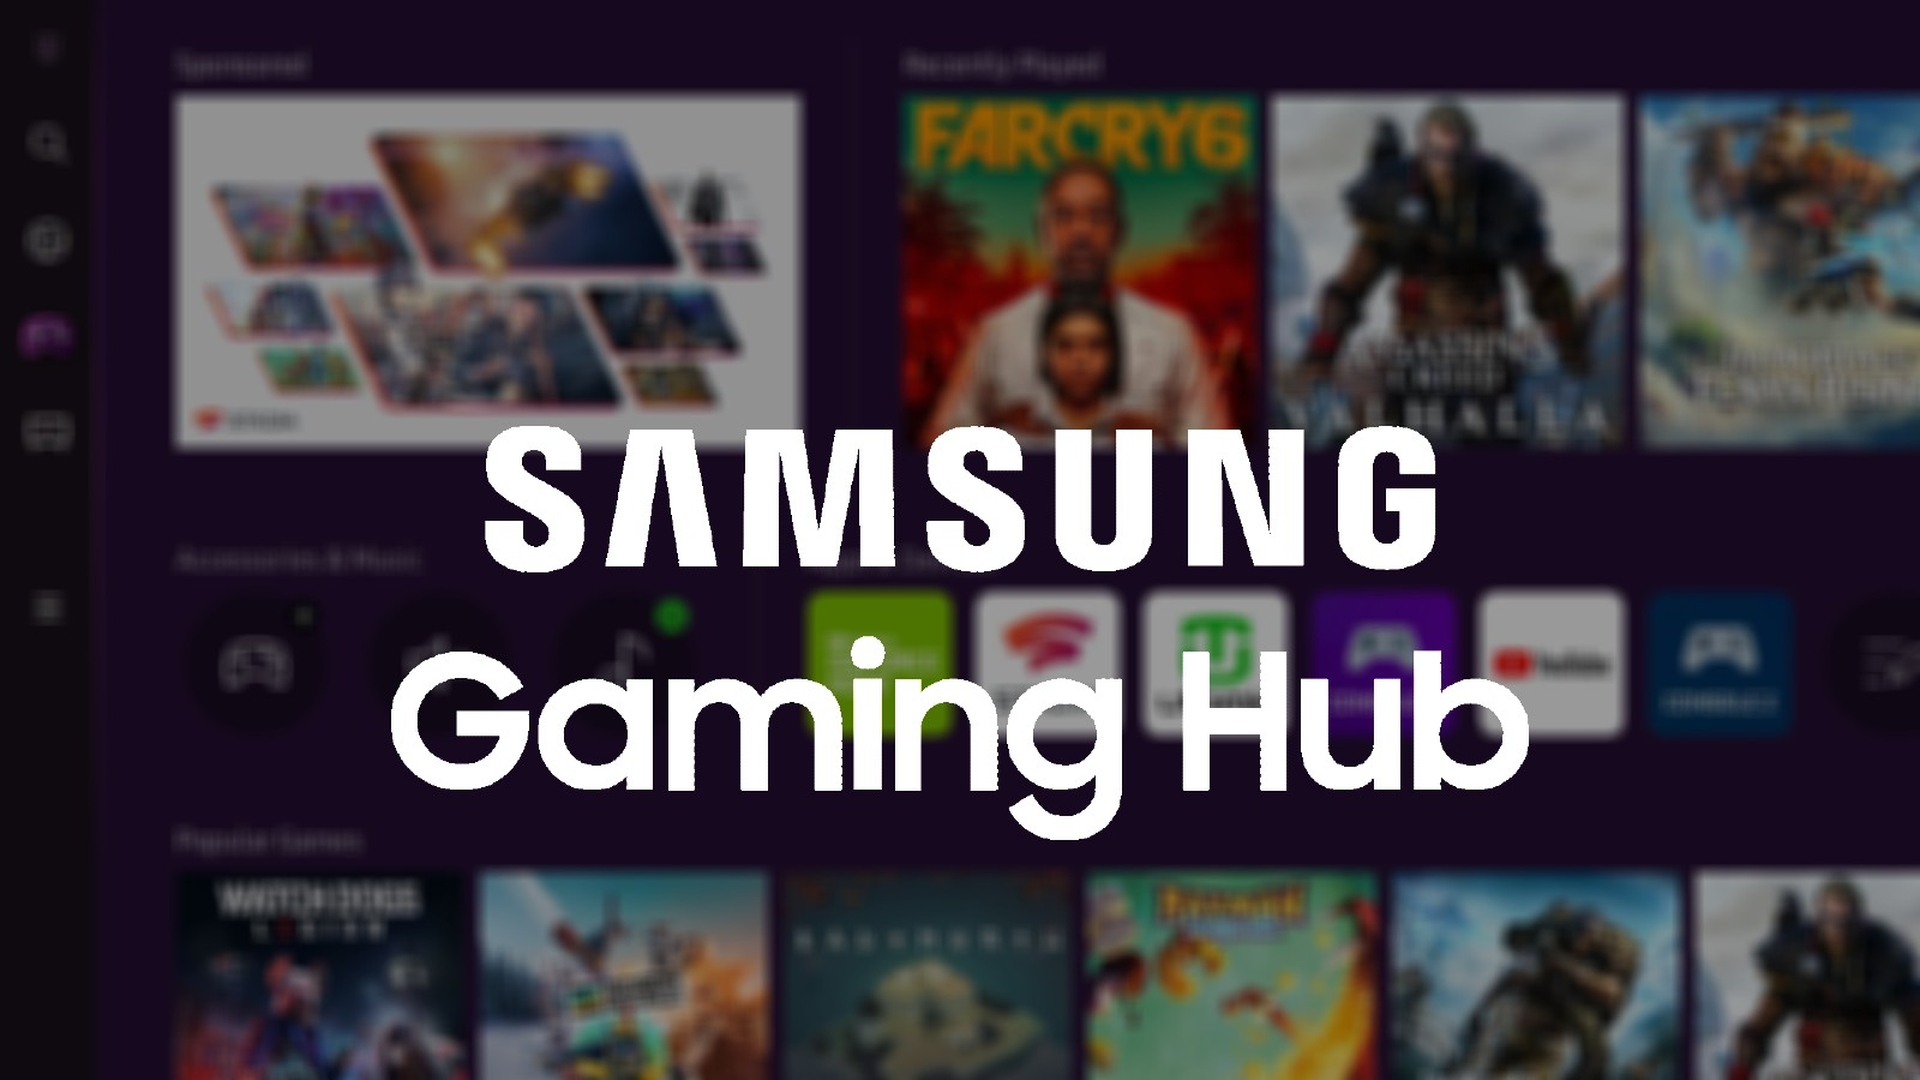 Samsung Gaming Hub is almost here, and it will feature Xbox Cloud Gaming as a way to enjoy games without a console on 2022 Samsung Smart TVs.